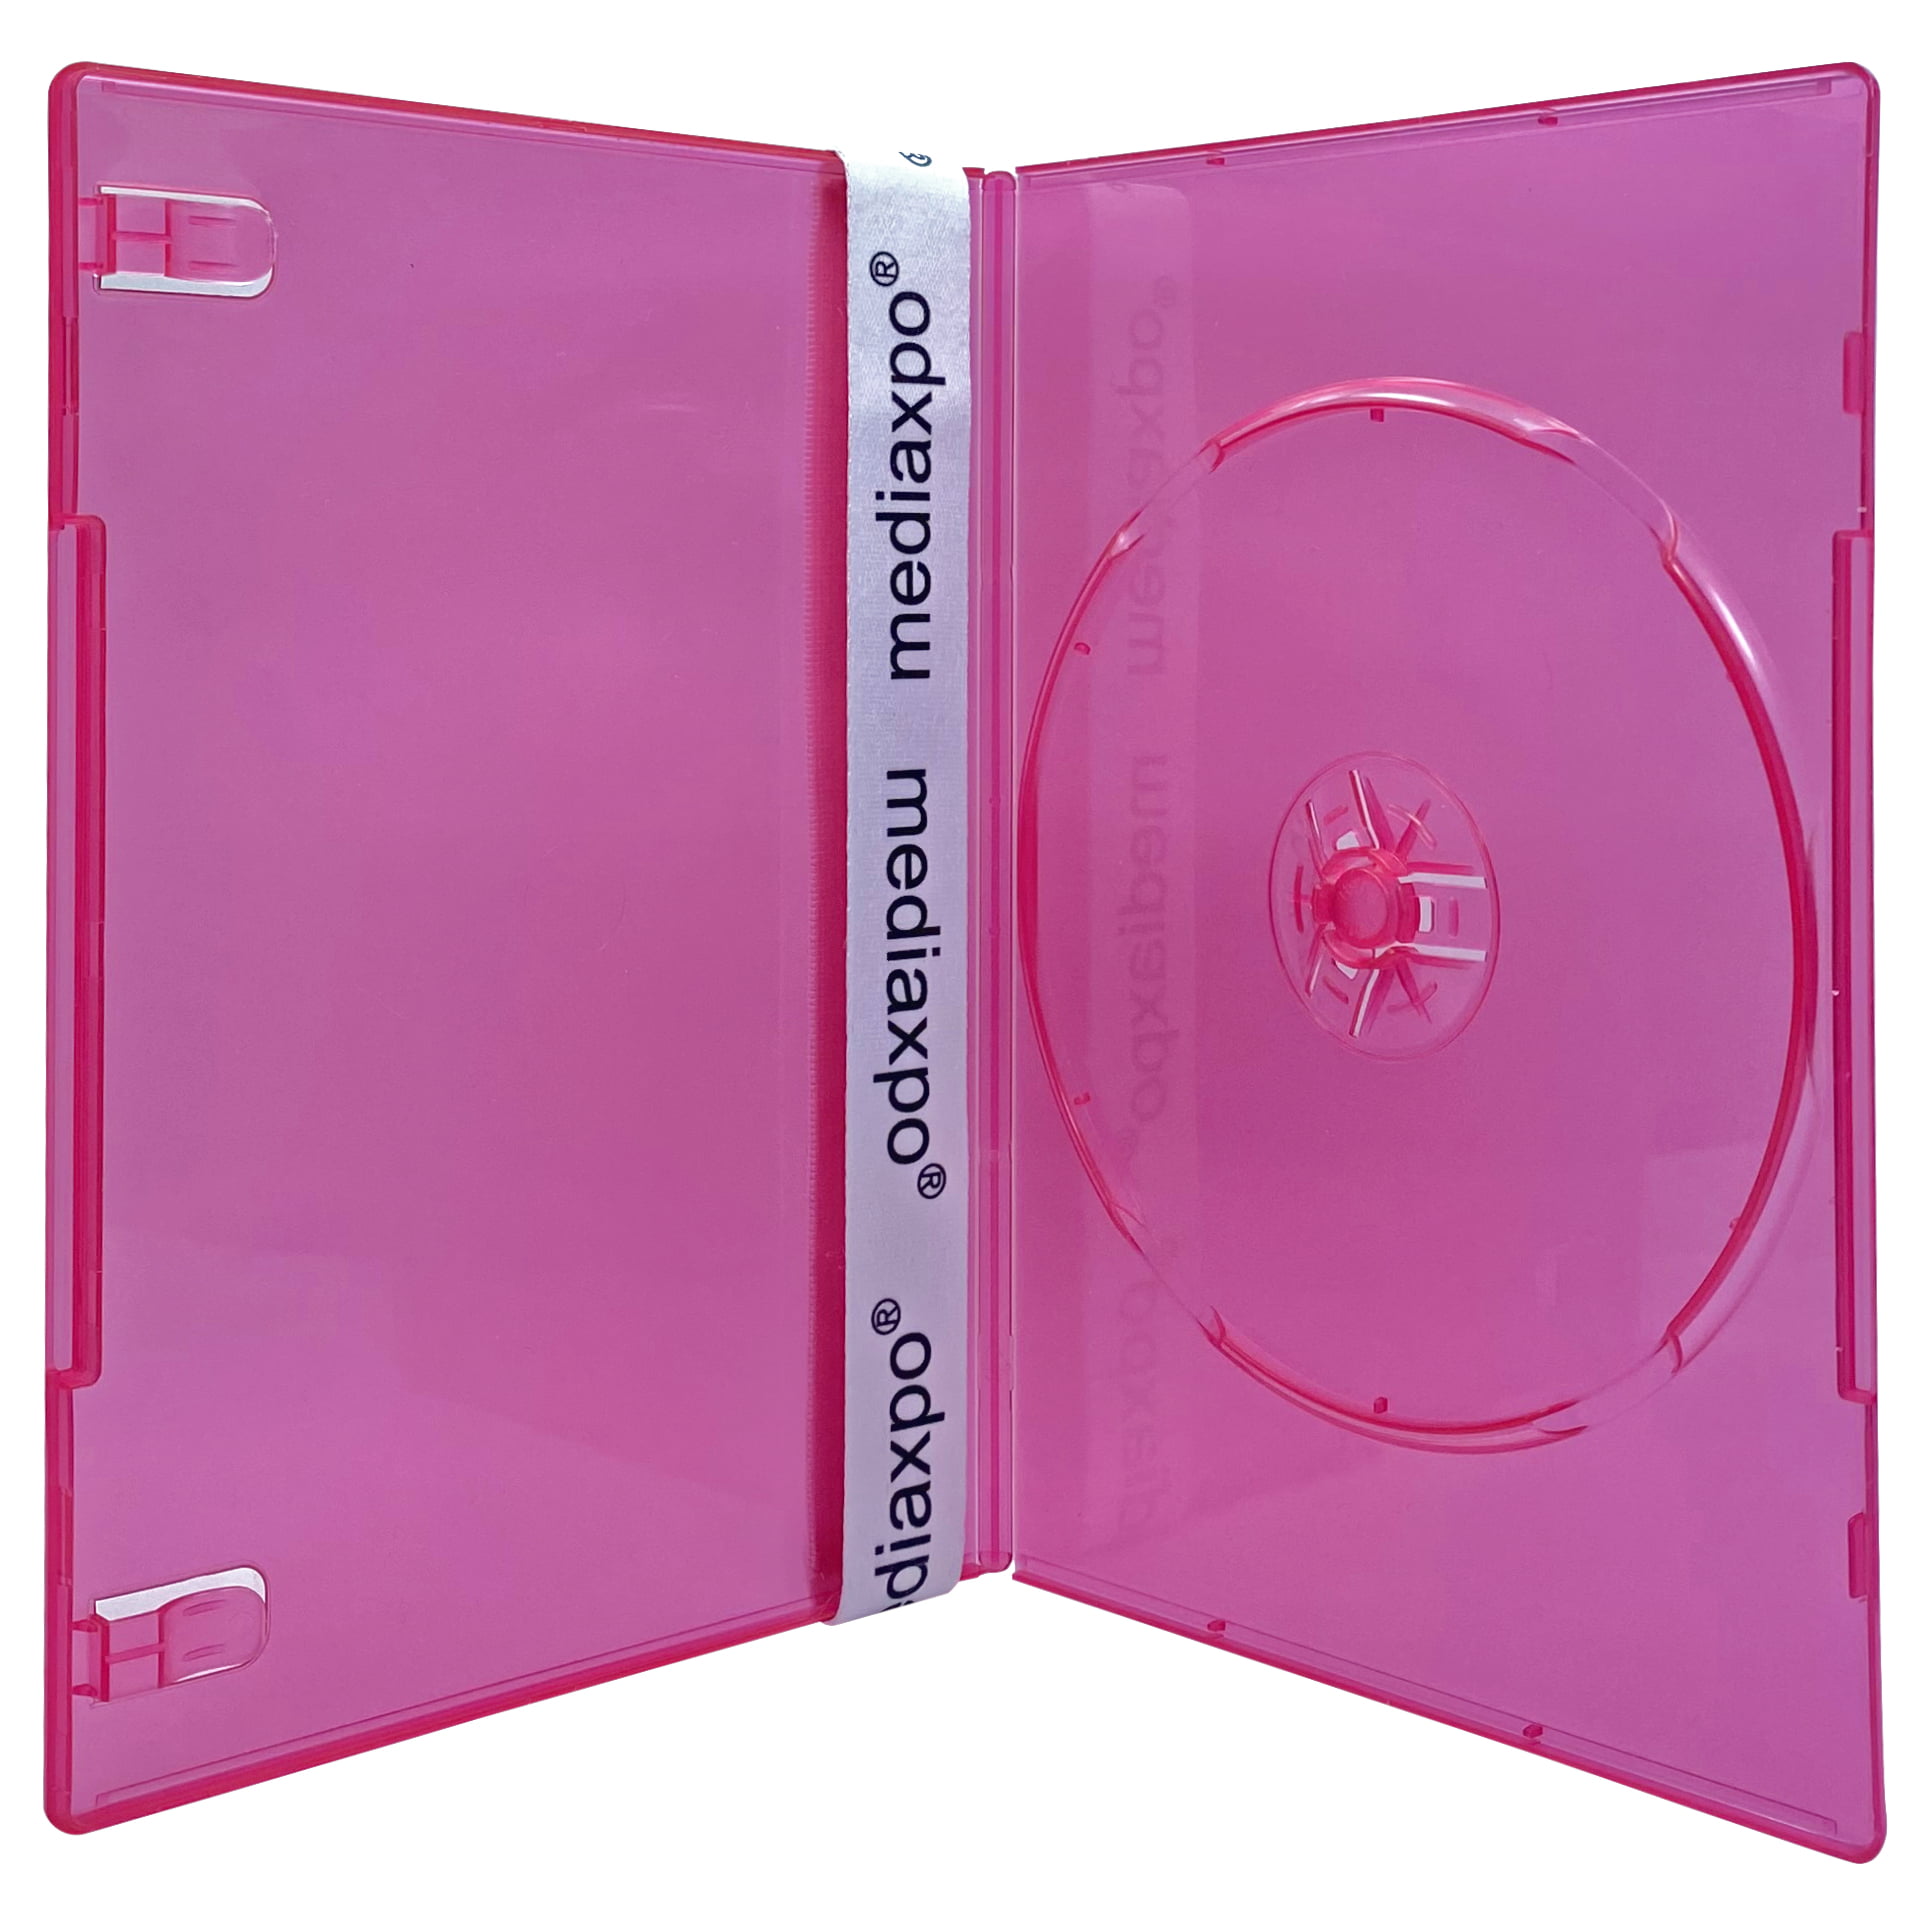 mediaxpo 25 Purple Color Round Clamshell CD/DVD Case with Lock